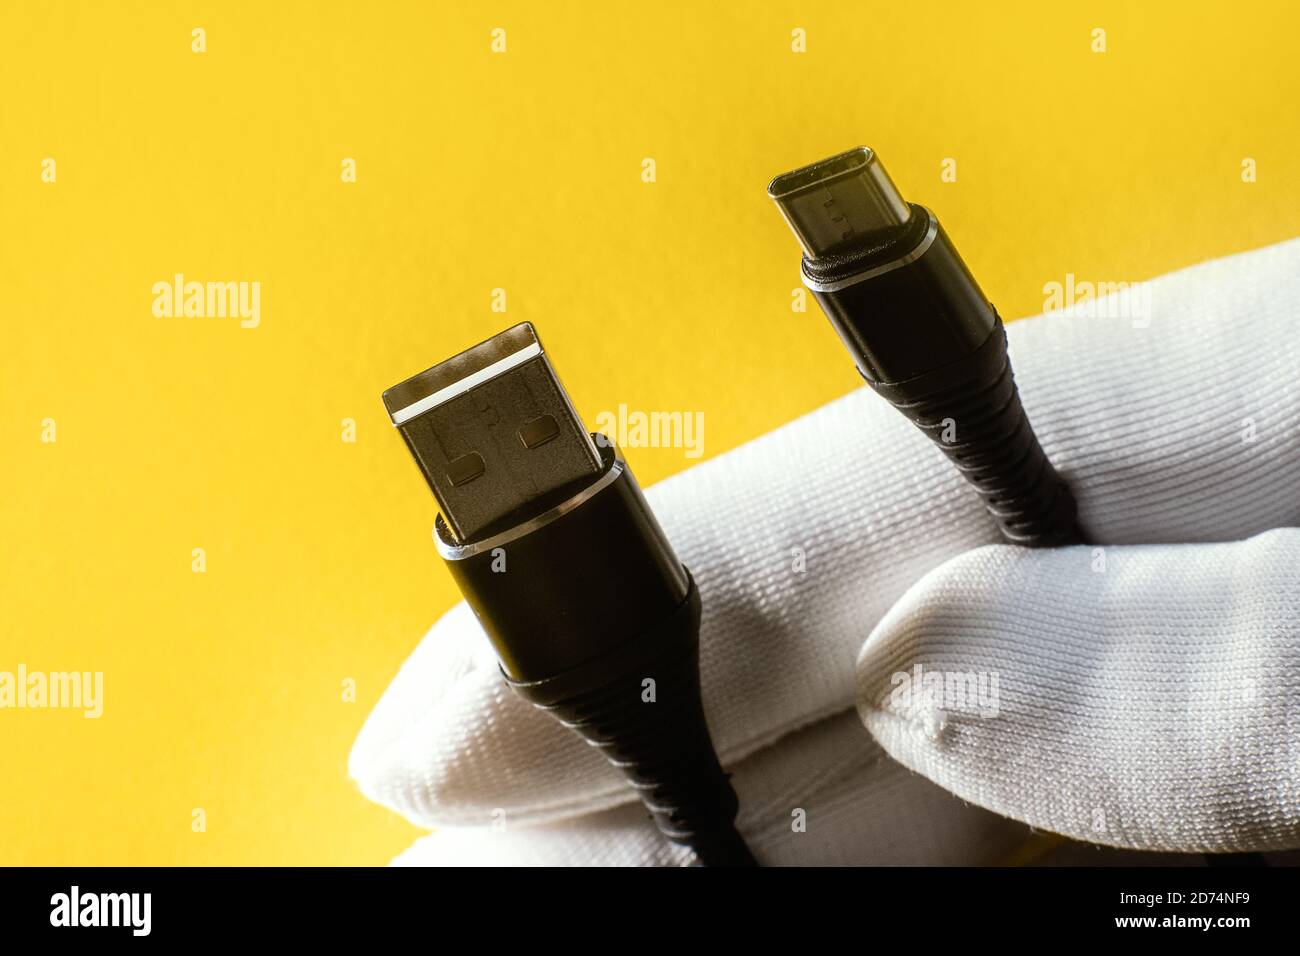 USB cable from USB to USB 3.1 type C. abstract yellow background for ad design Stock Photo